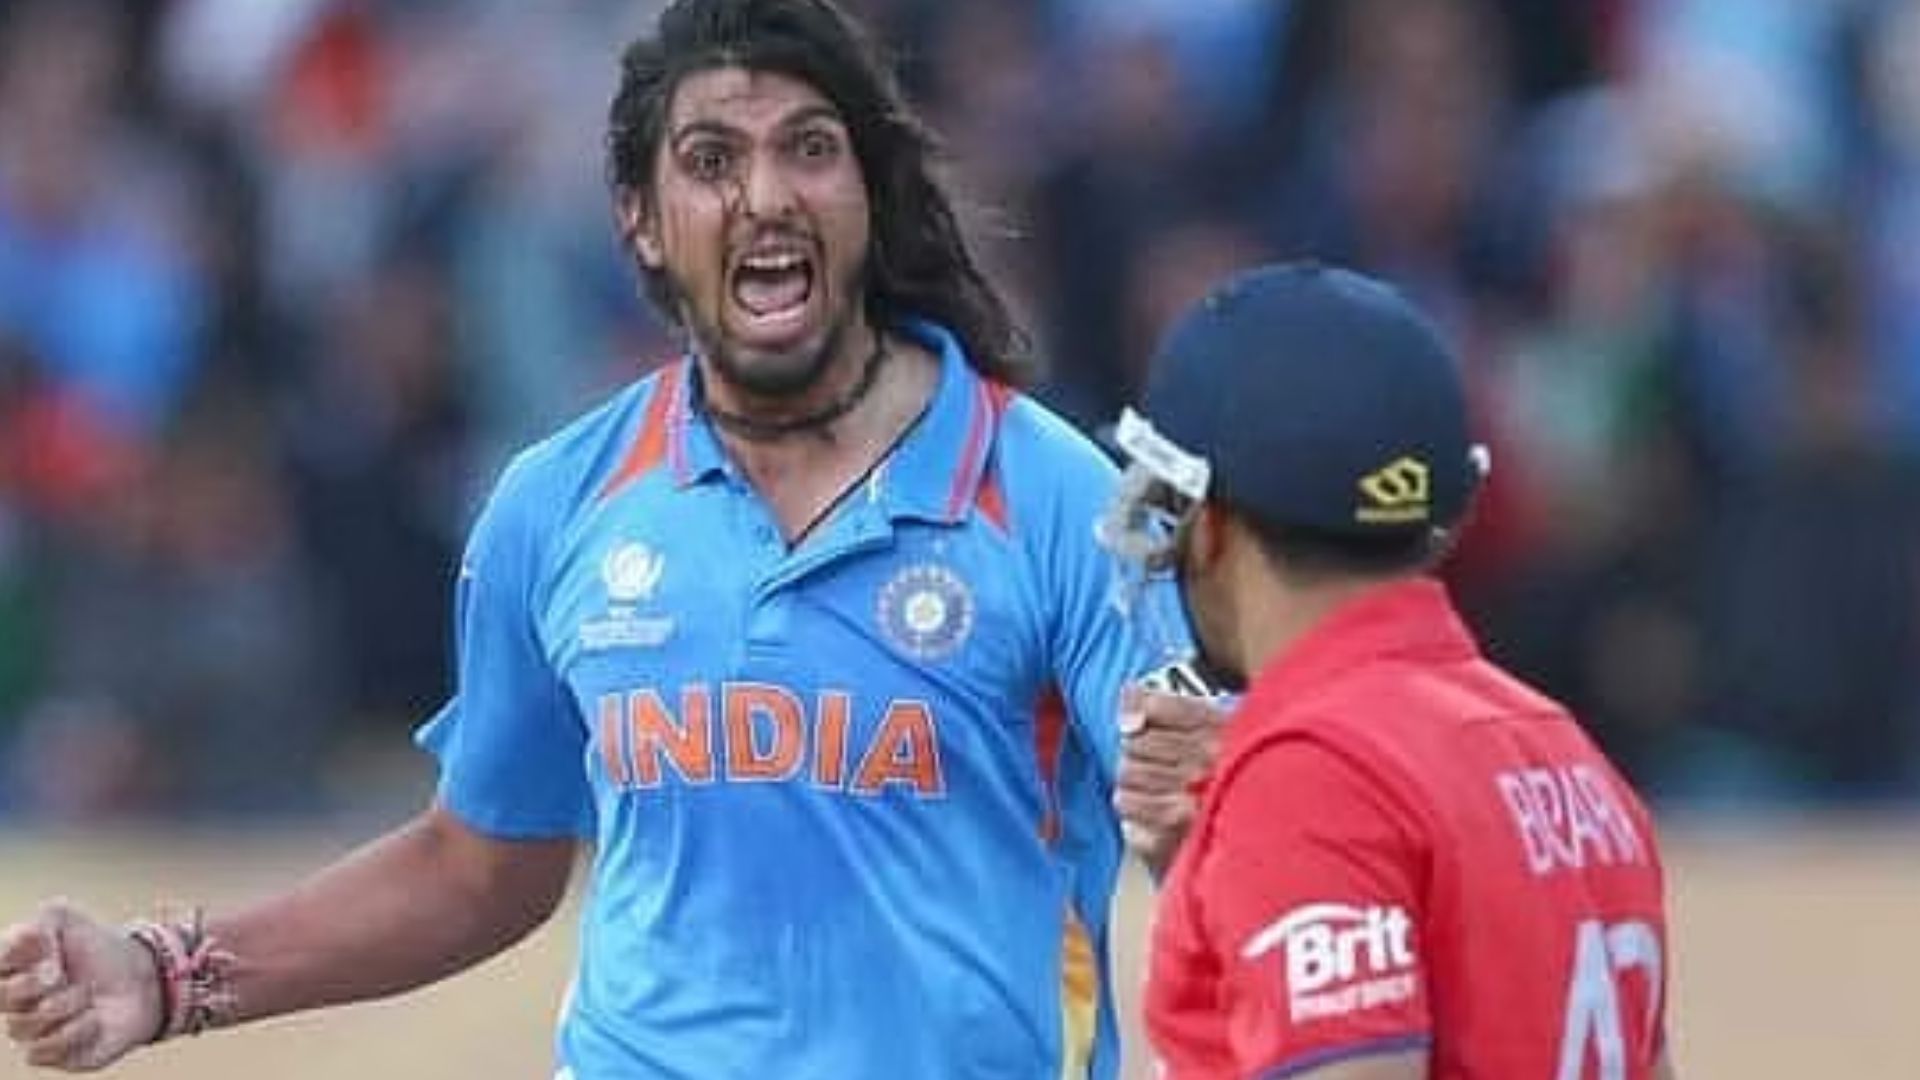 Ishant Sharma celebrates the wicket of Ravi Bopara in the CT final.